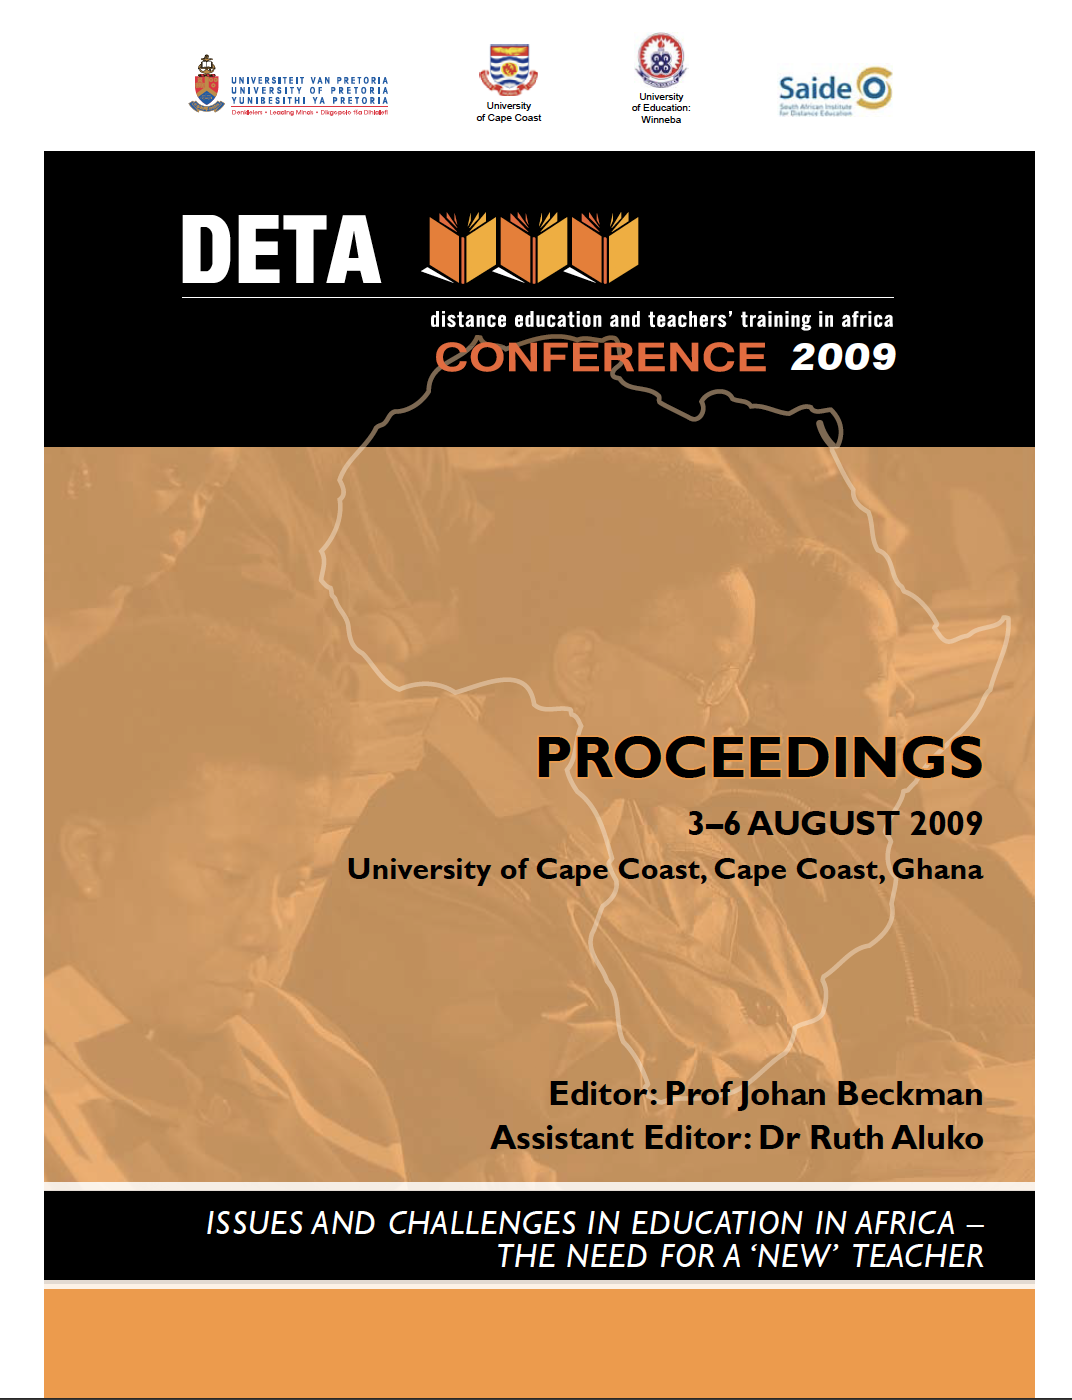 					View 2009: DETA CONFERENCE 2009: Issues and Challenges in Education in Africa: The Need for a 'New' Teacher
				